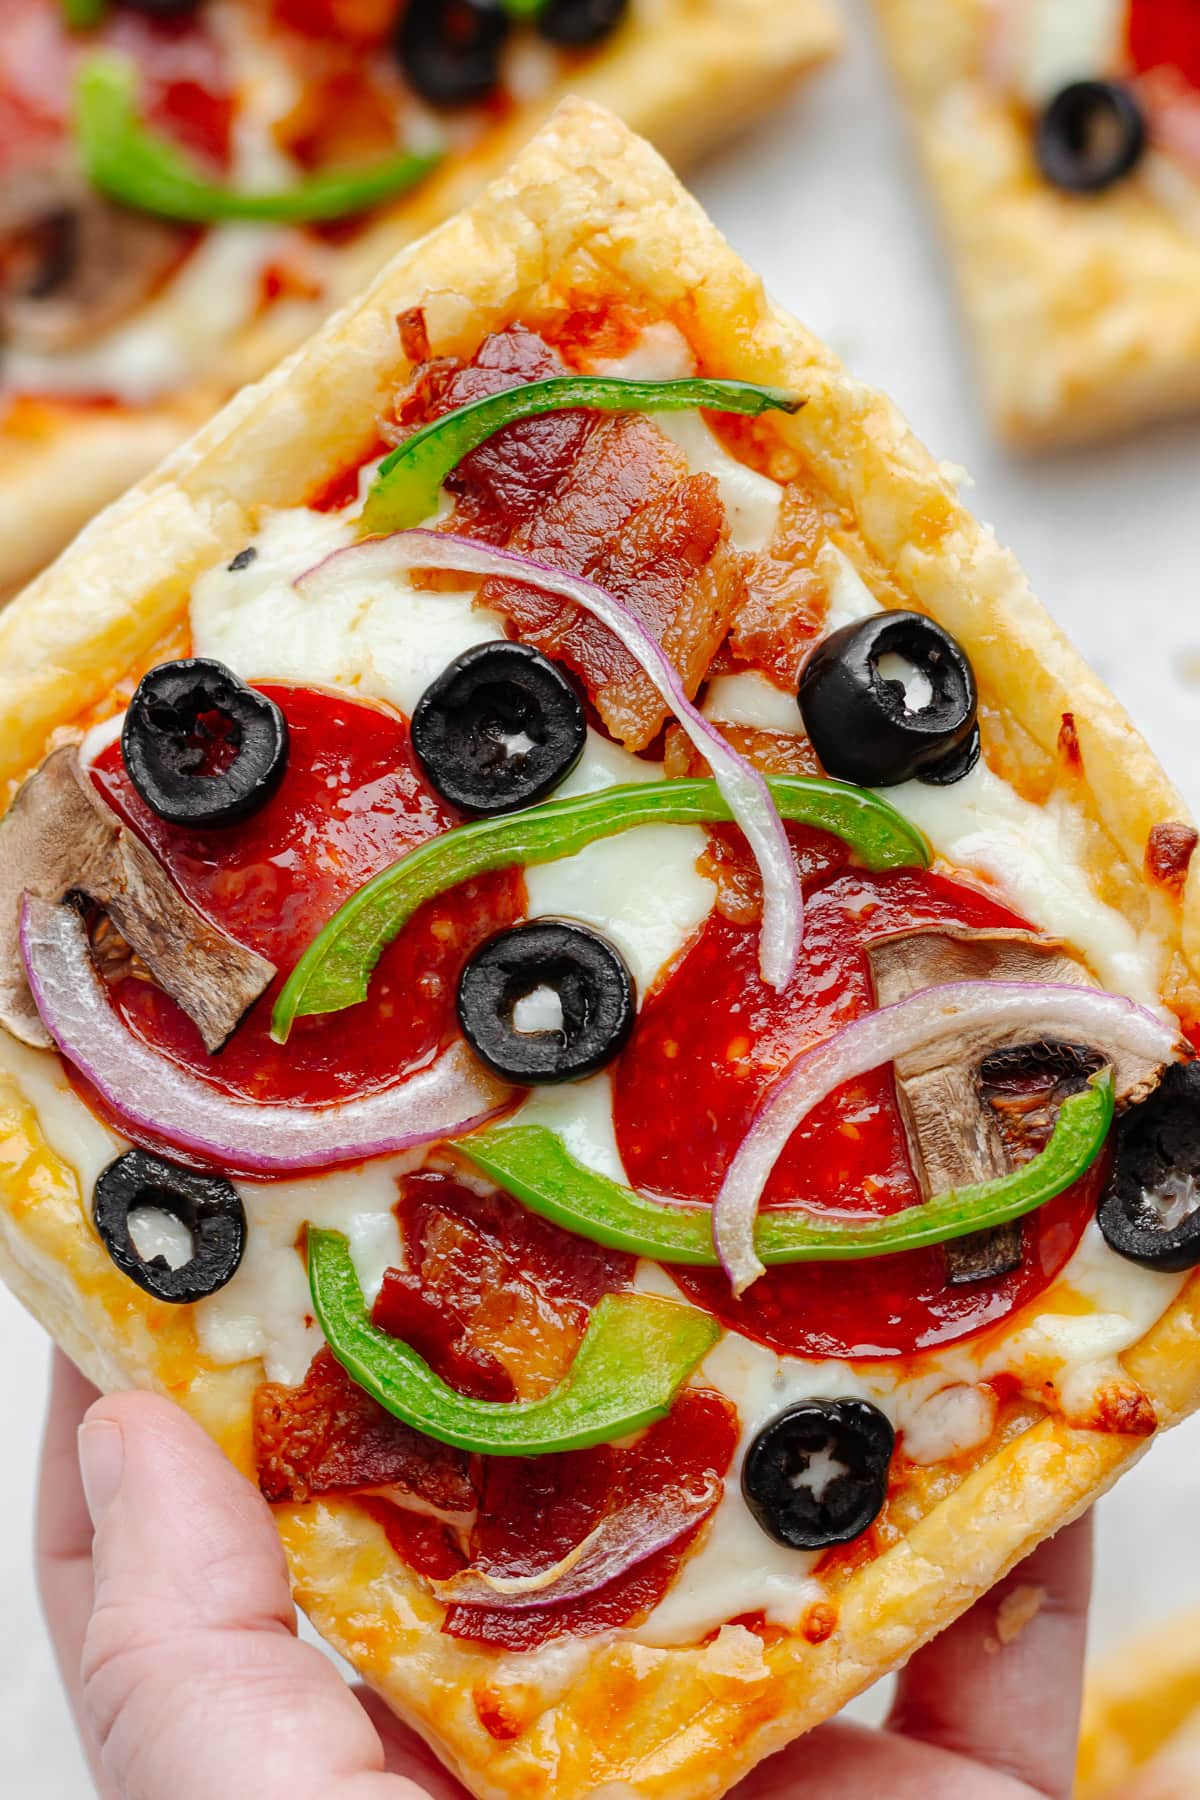 Hand holding a square puff pastry pizza topped with tomato sauce, mozzarella, pepperoni, bacon, green bell pepper, mushrooms, red onion and black olives.